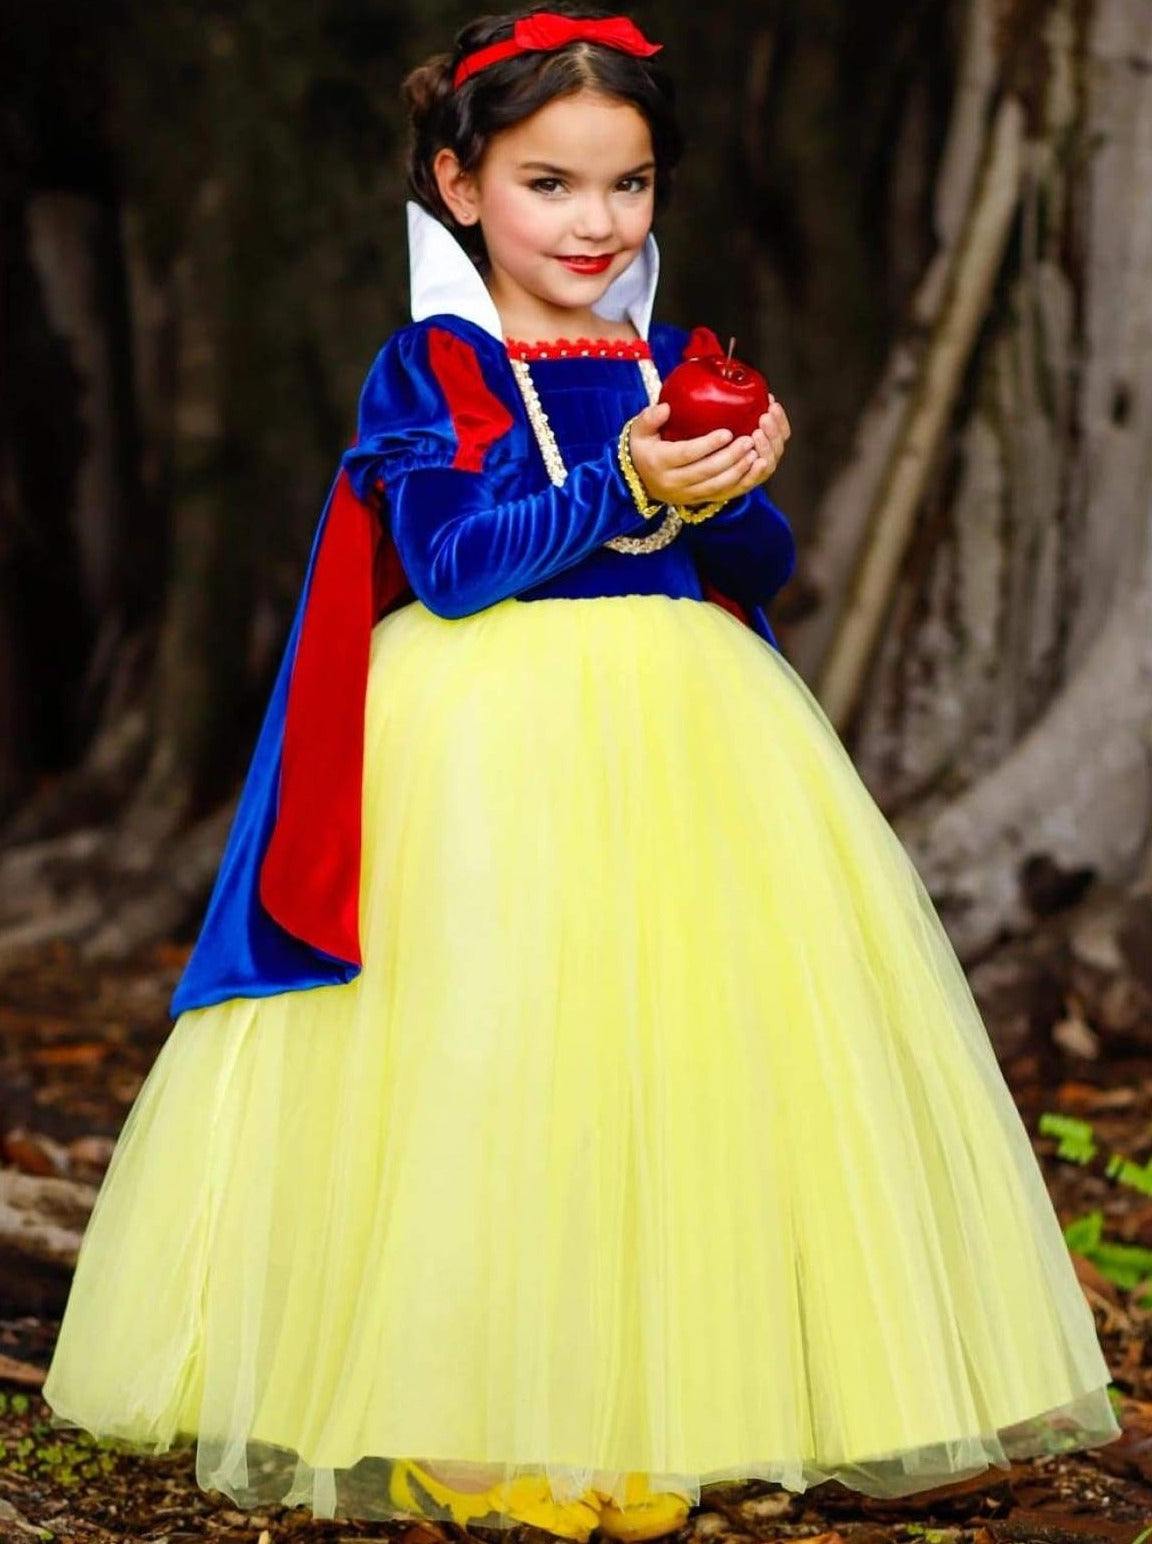 Girls Halloween Costumes | Toddlers Snow White Gown - Mia Belle Girls